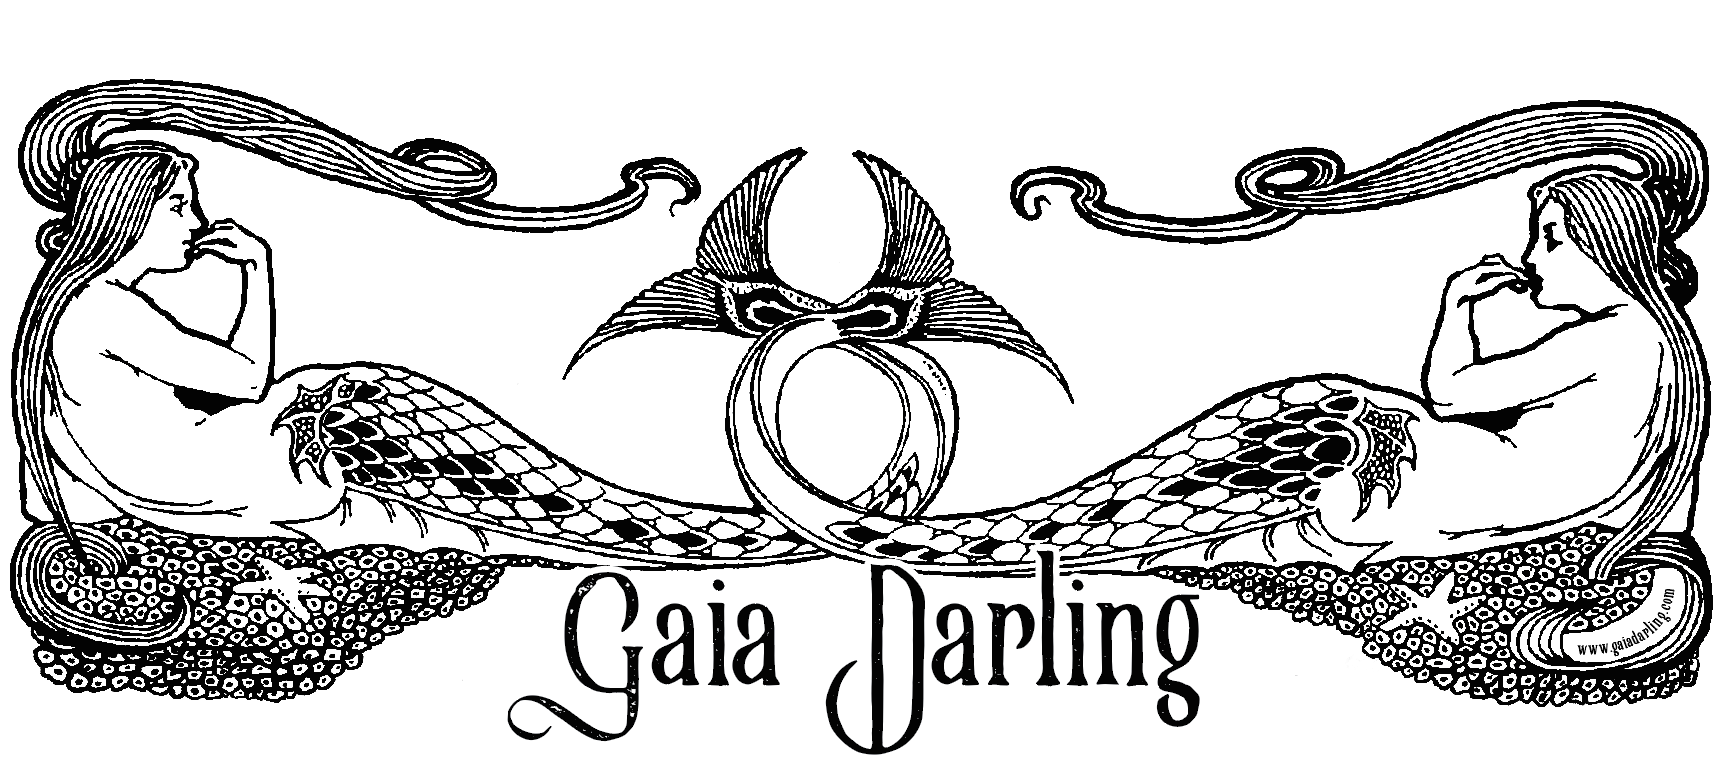 File:Dont worry darling logo.png - Wikimedia Commons